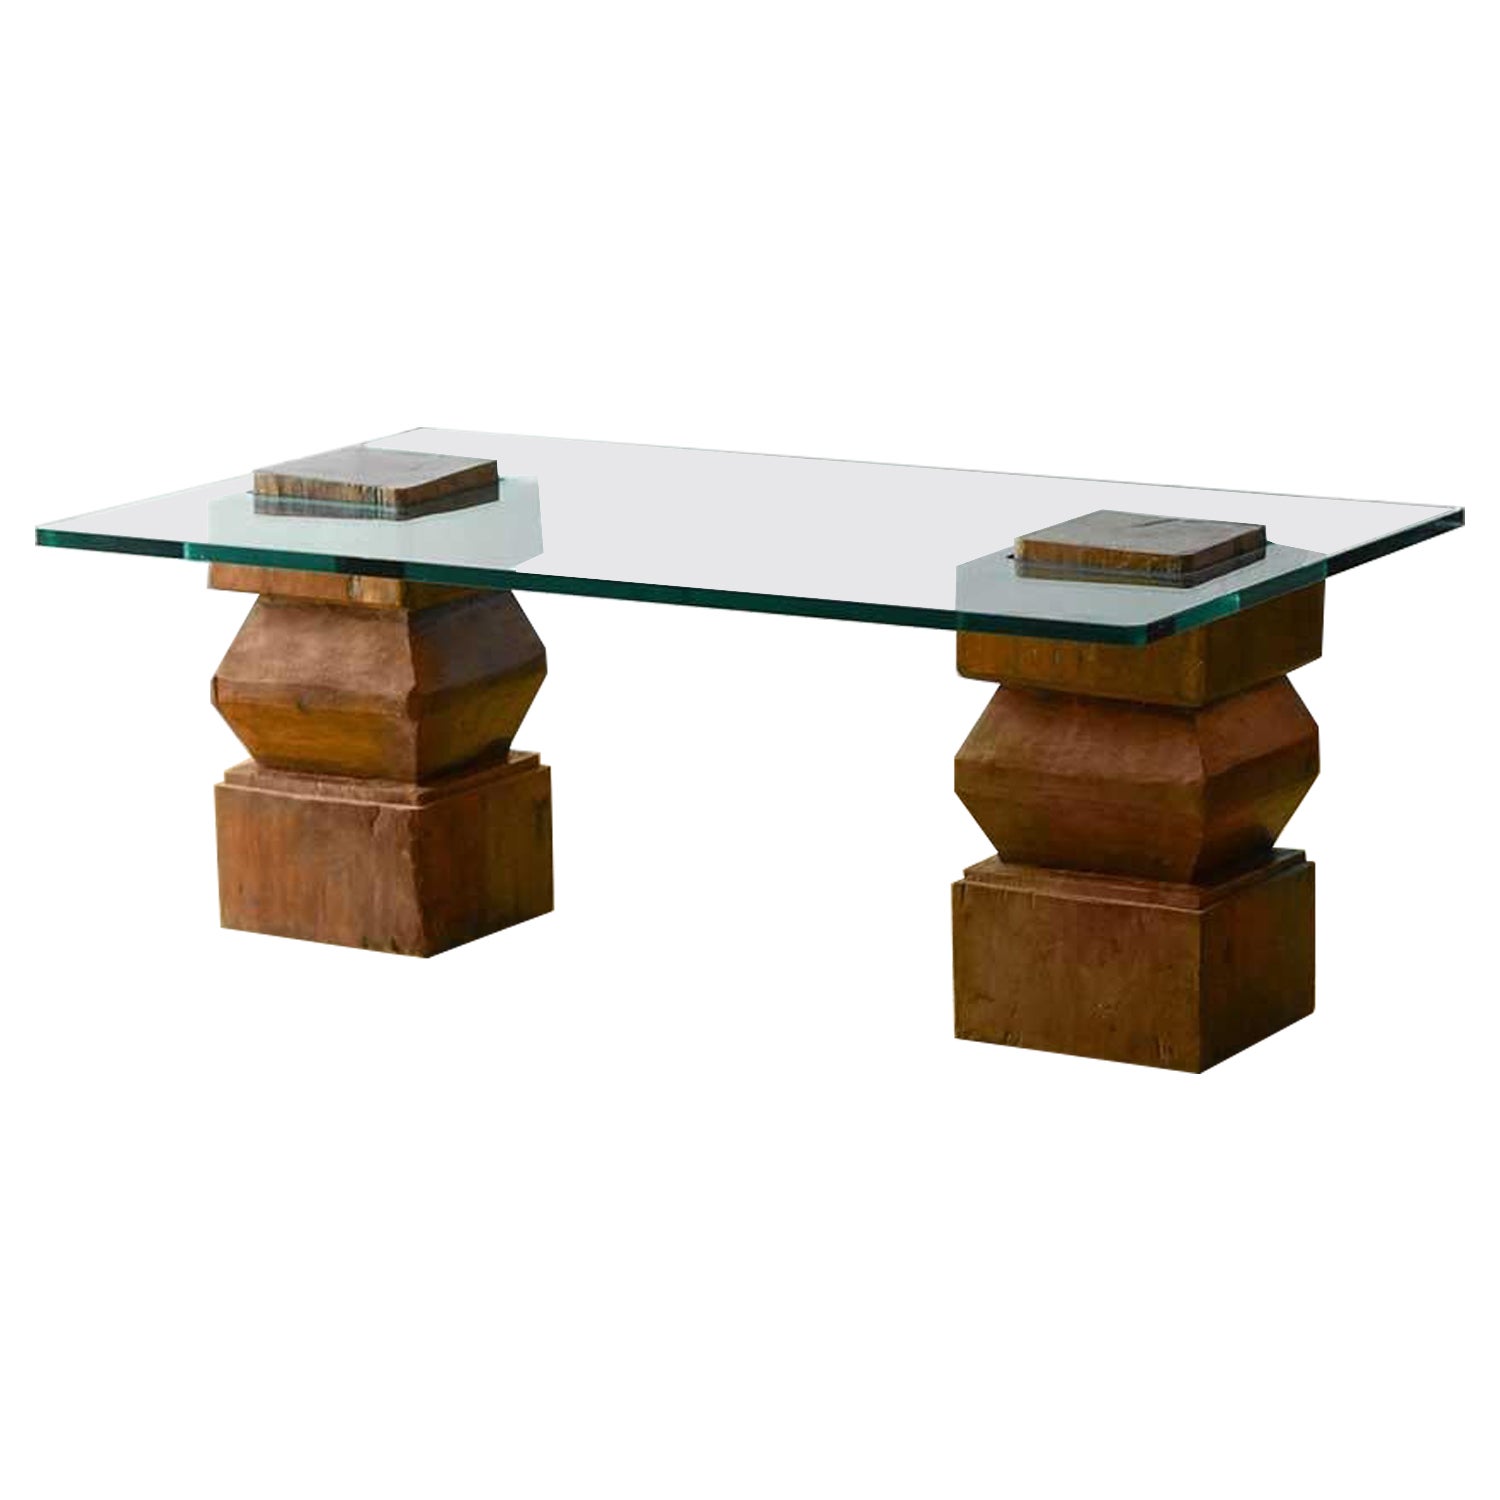 Coffee table with wooden bases and glass top